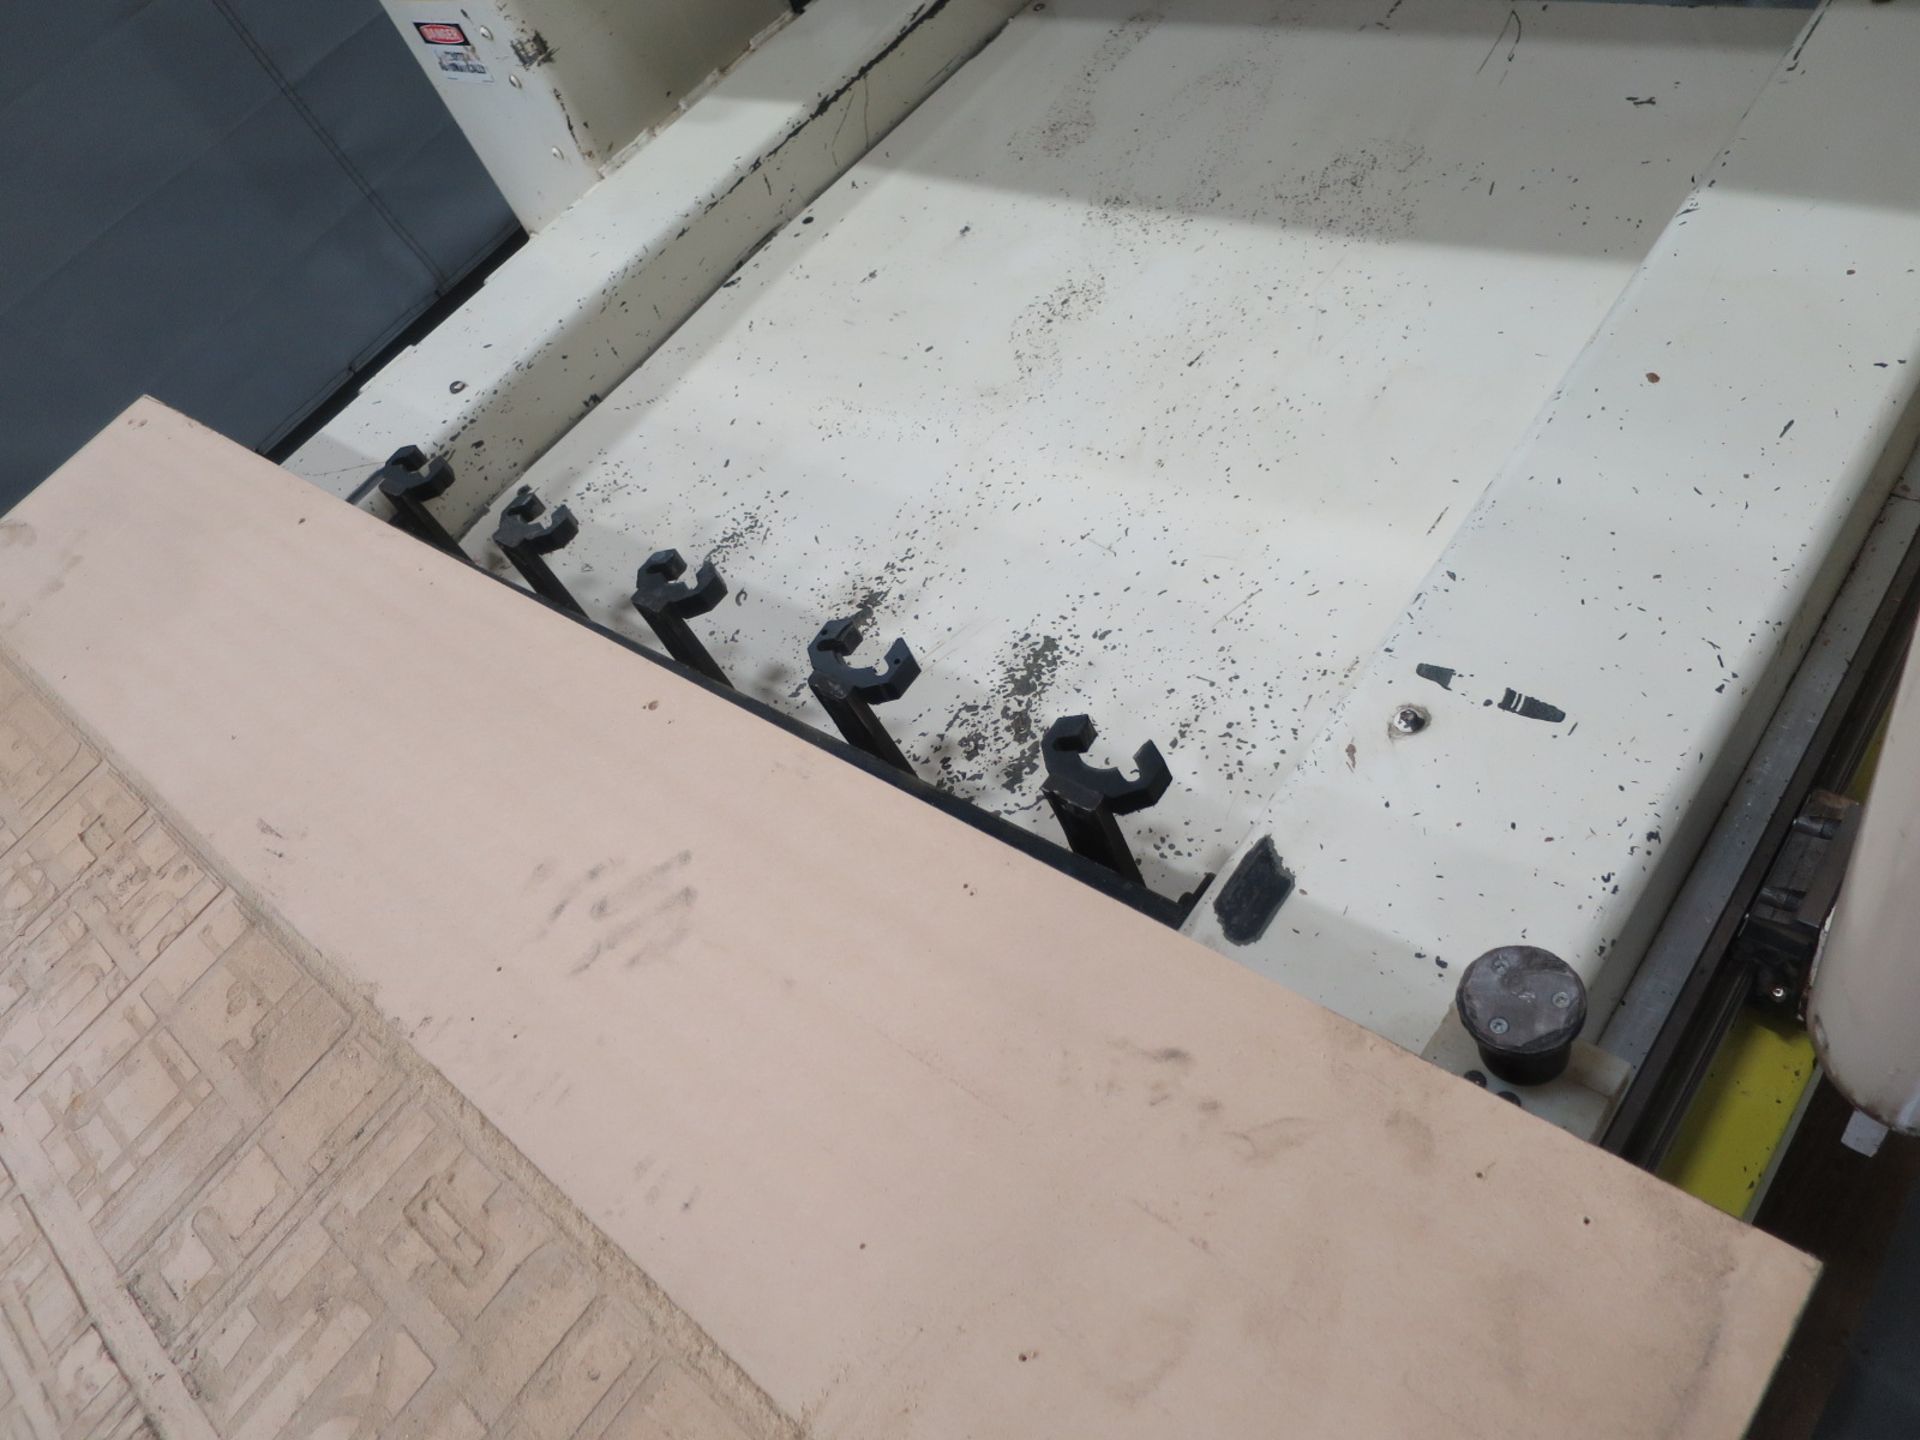 5'X10' THERMWOOD C-53 3-AXIS CNC ROUTER, S/N 530550596, NEW 1996 - Image 5 of 6